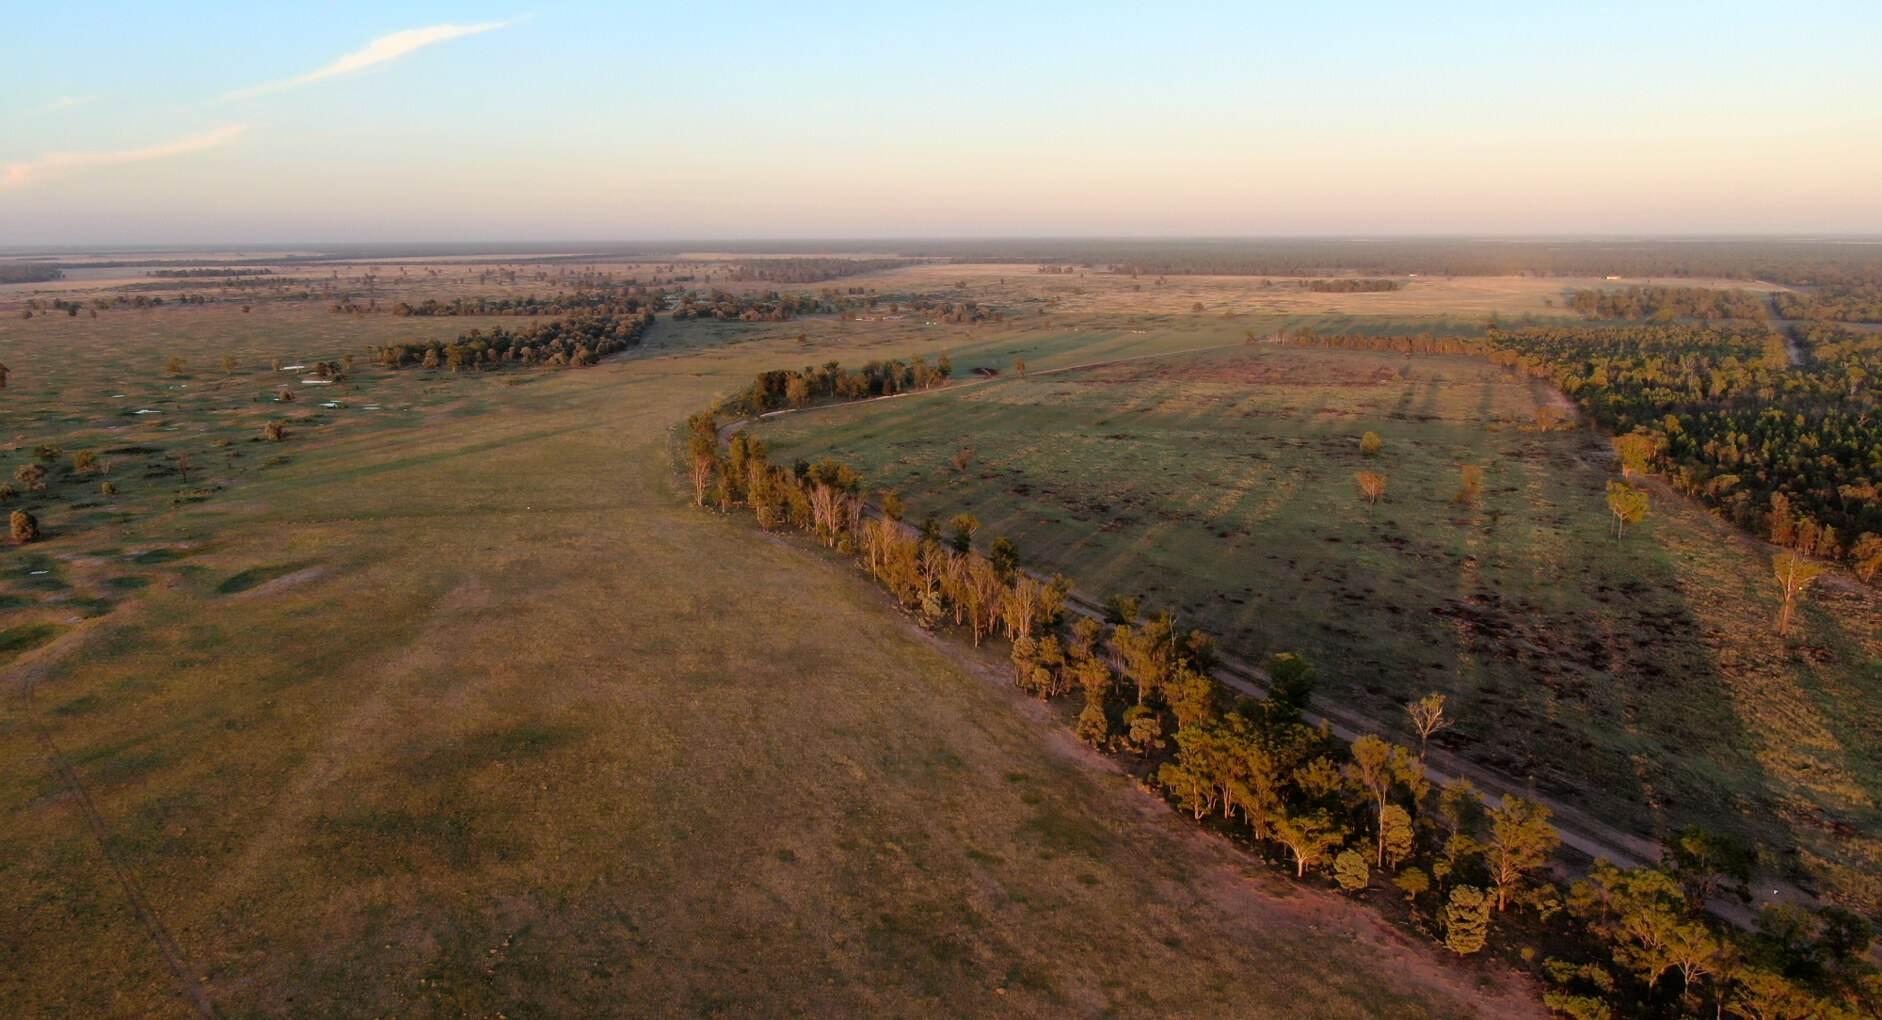 Rural Property For Sale QLD Western Downs